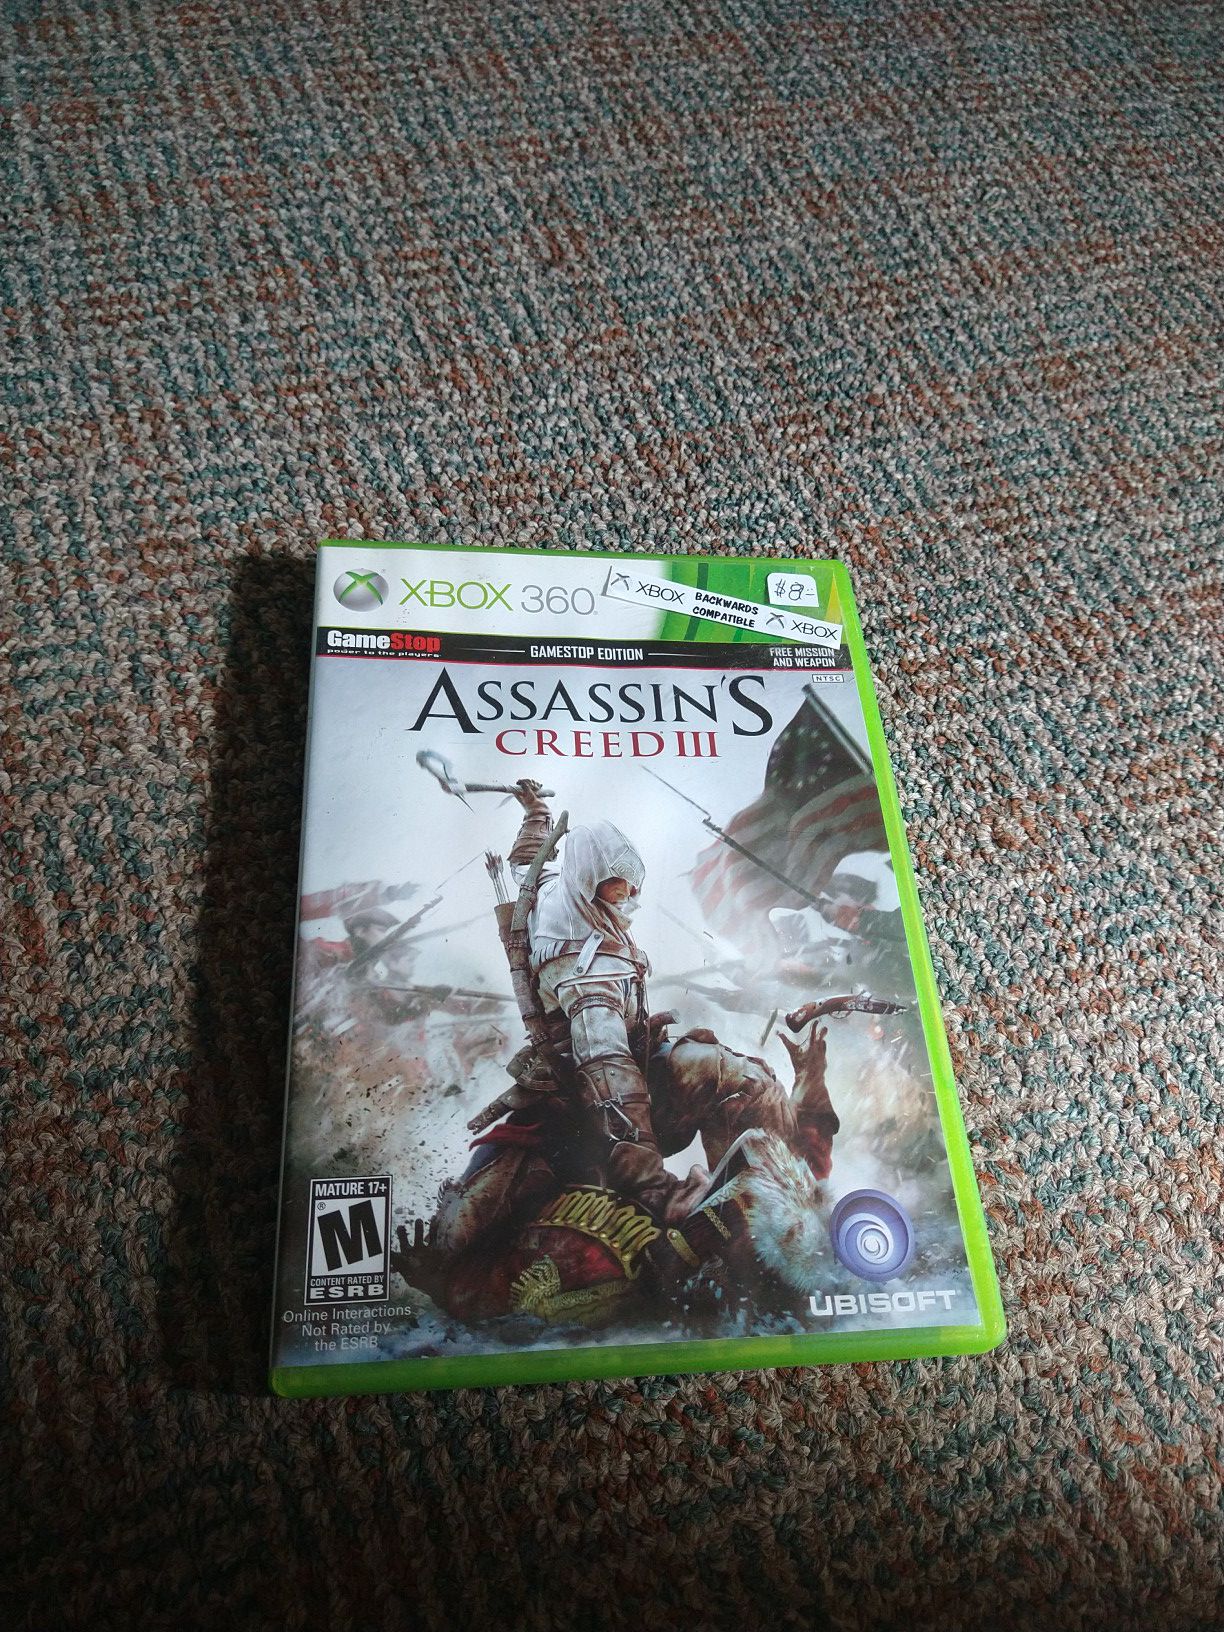 Assassin's Creed III Xbox 360 video game gamestop edition